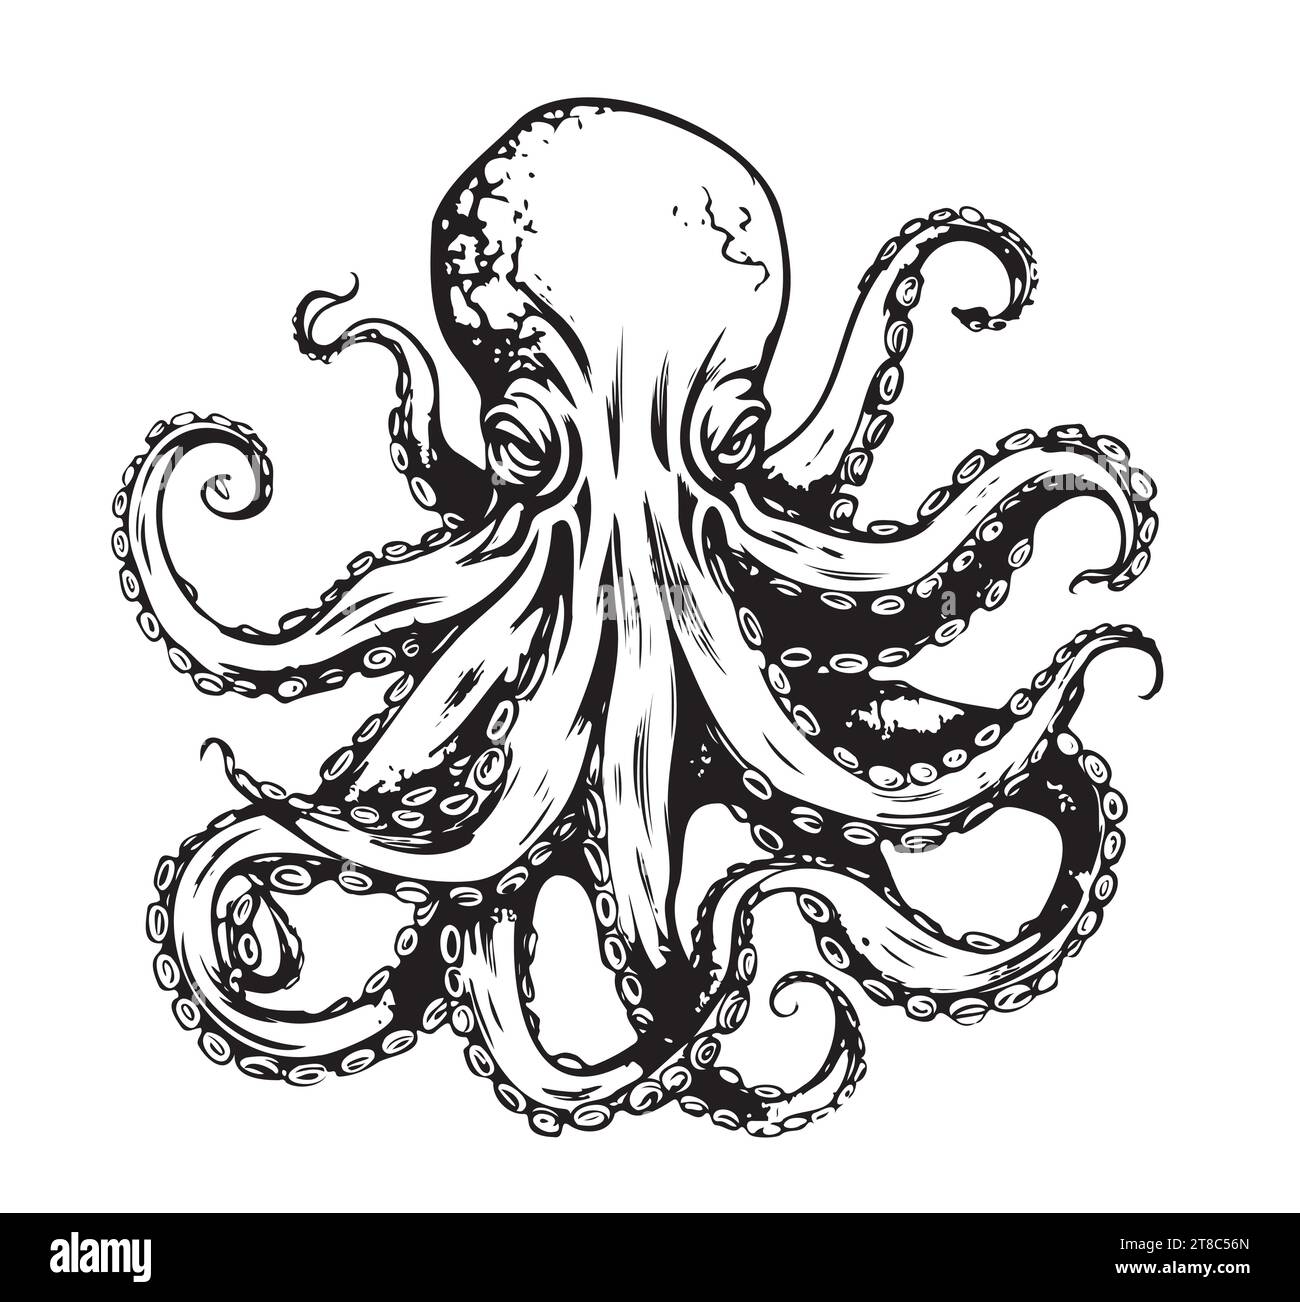 Octopus Vintage Vector Art isolated on white. Engraving style vector illustration of octopus. Sea animals Stock Vector